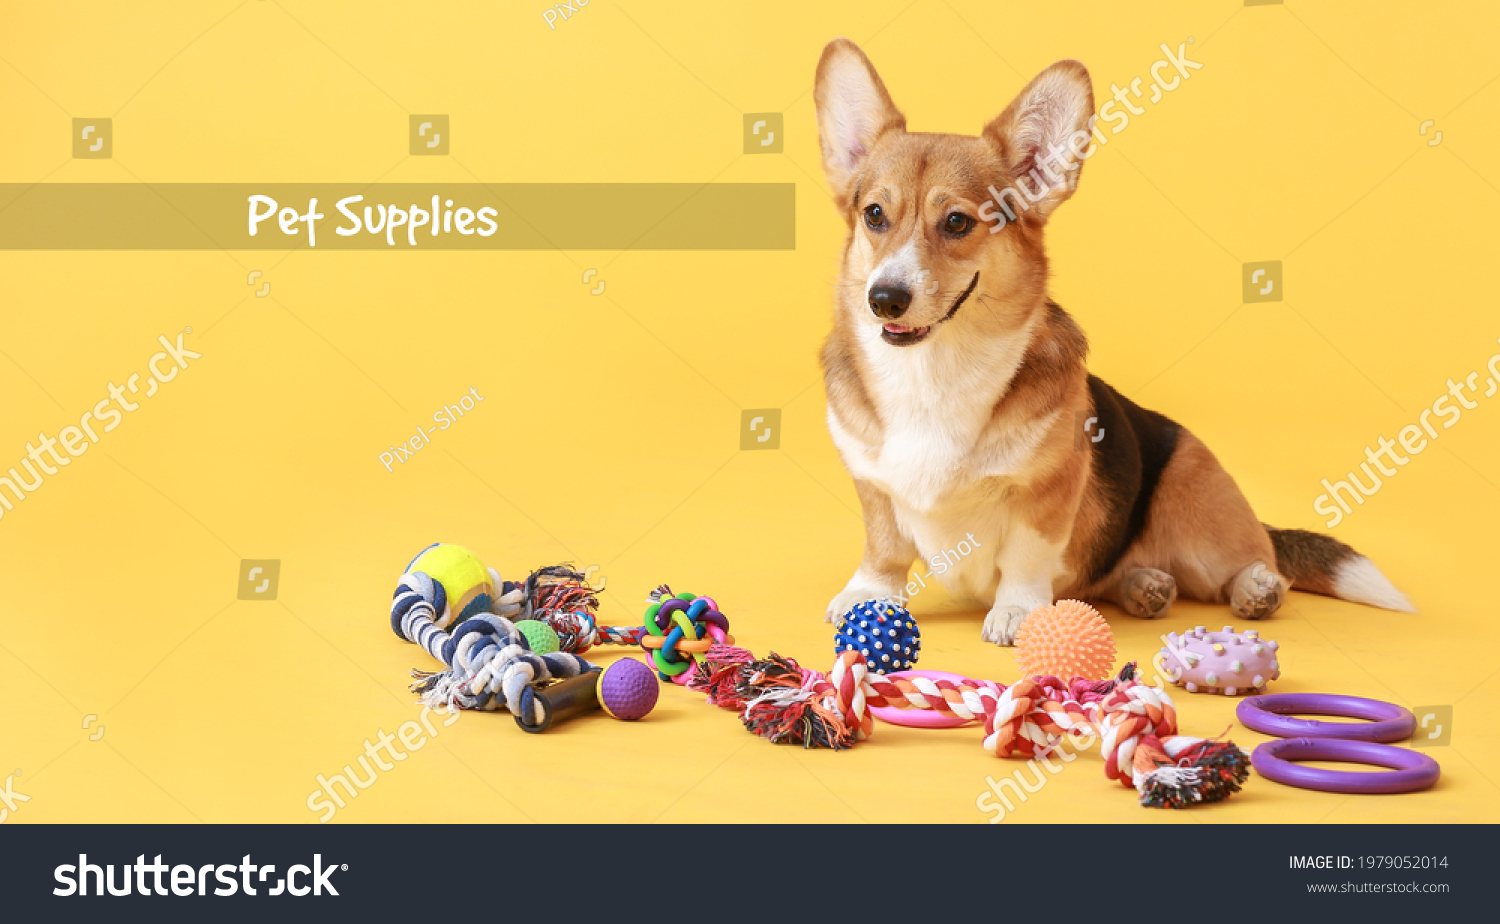 Text "Pet supplies" and cute dog with toys on color background #1979052014